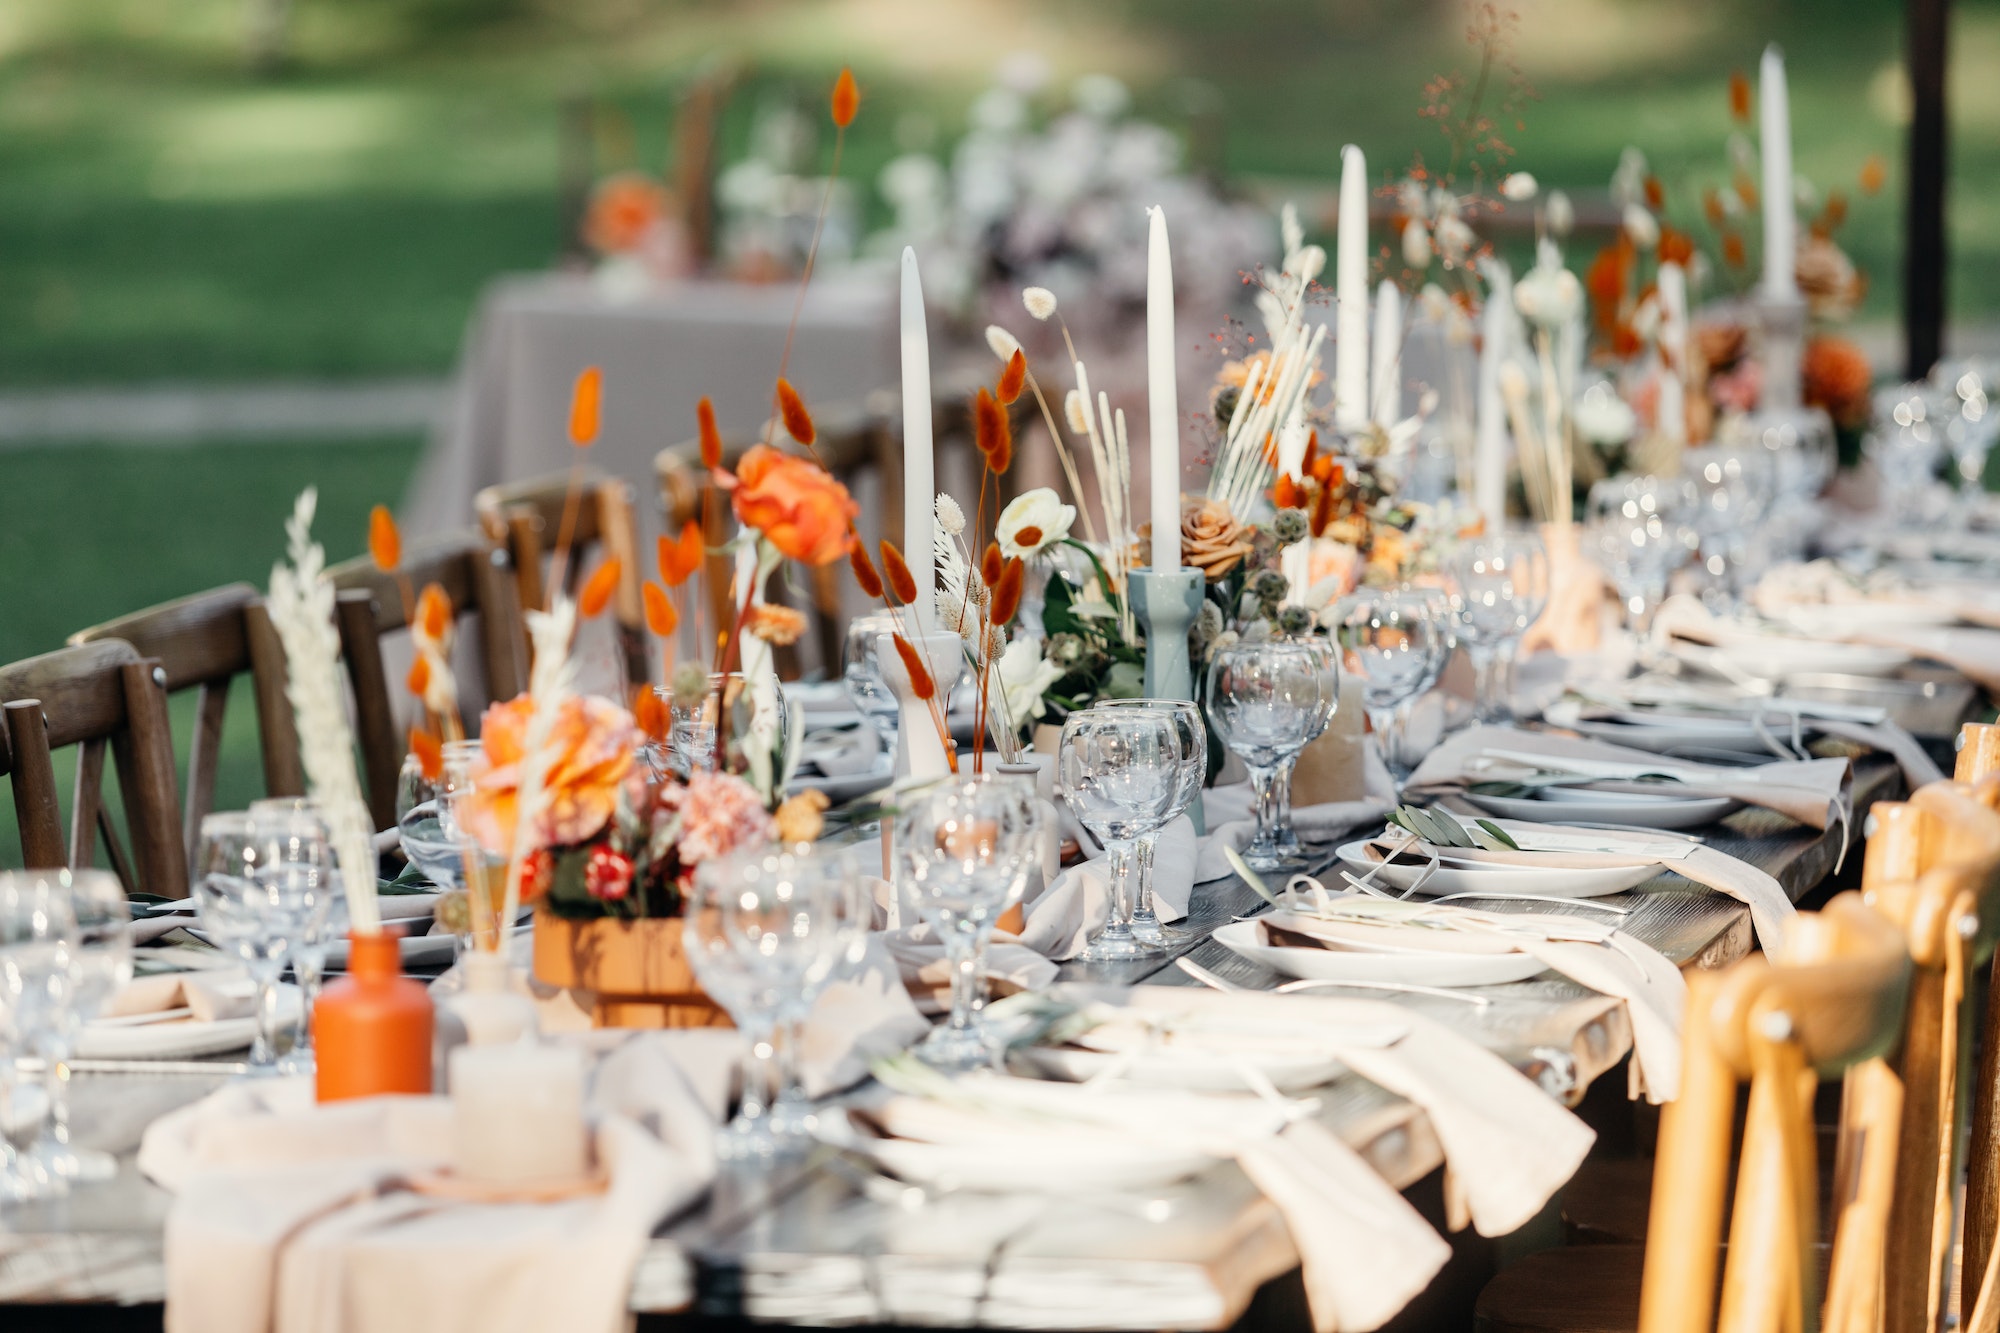 Luxury wedding reception, dining table setup with decoration on rustic wooden table